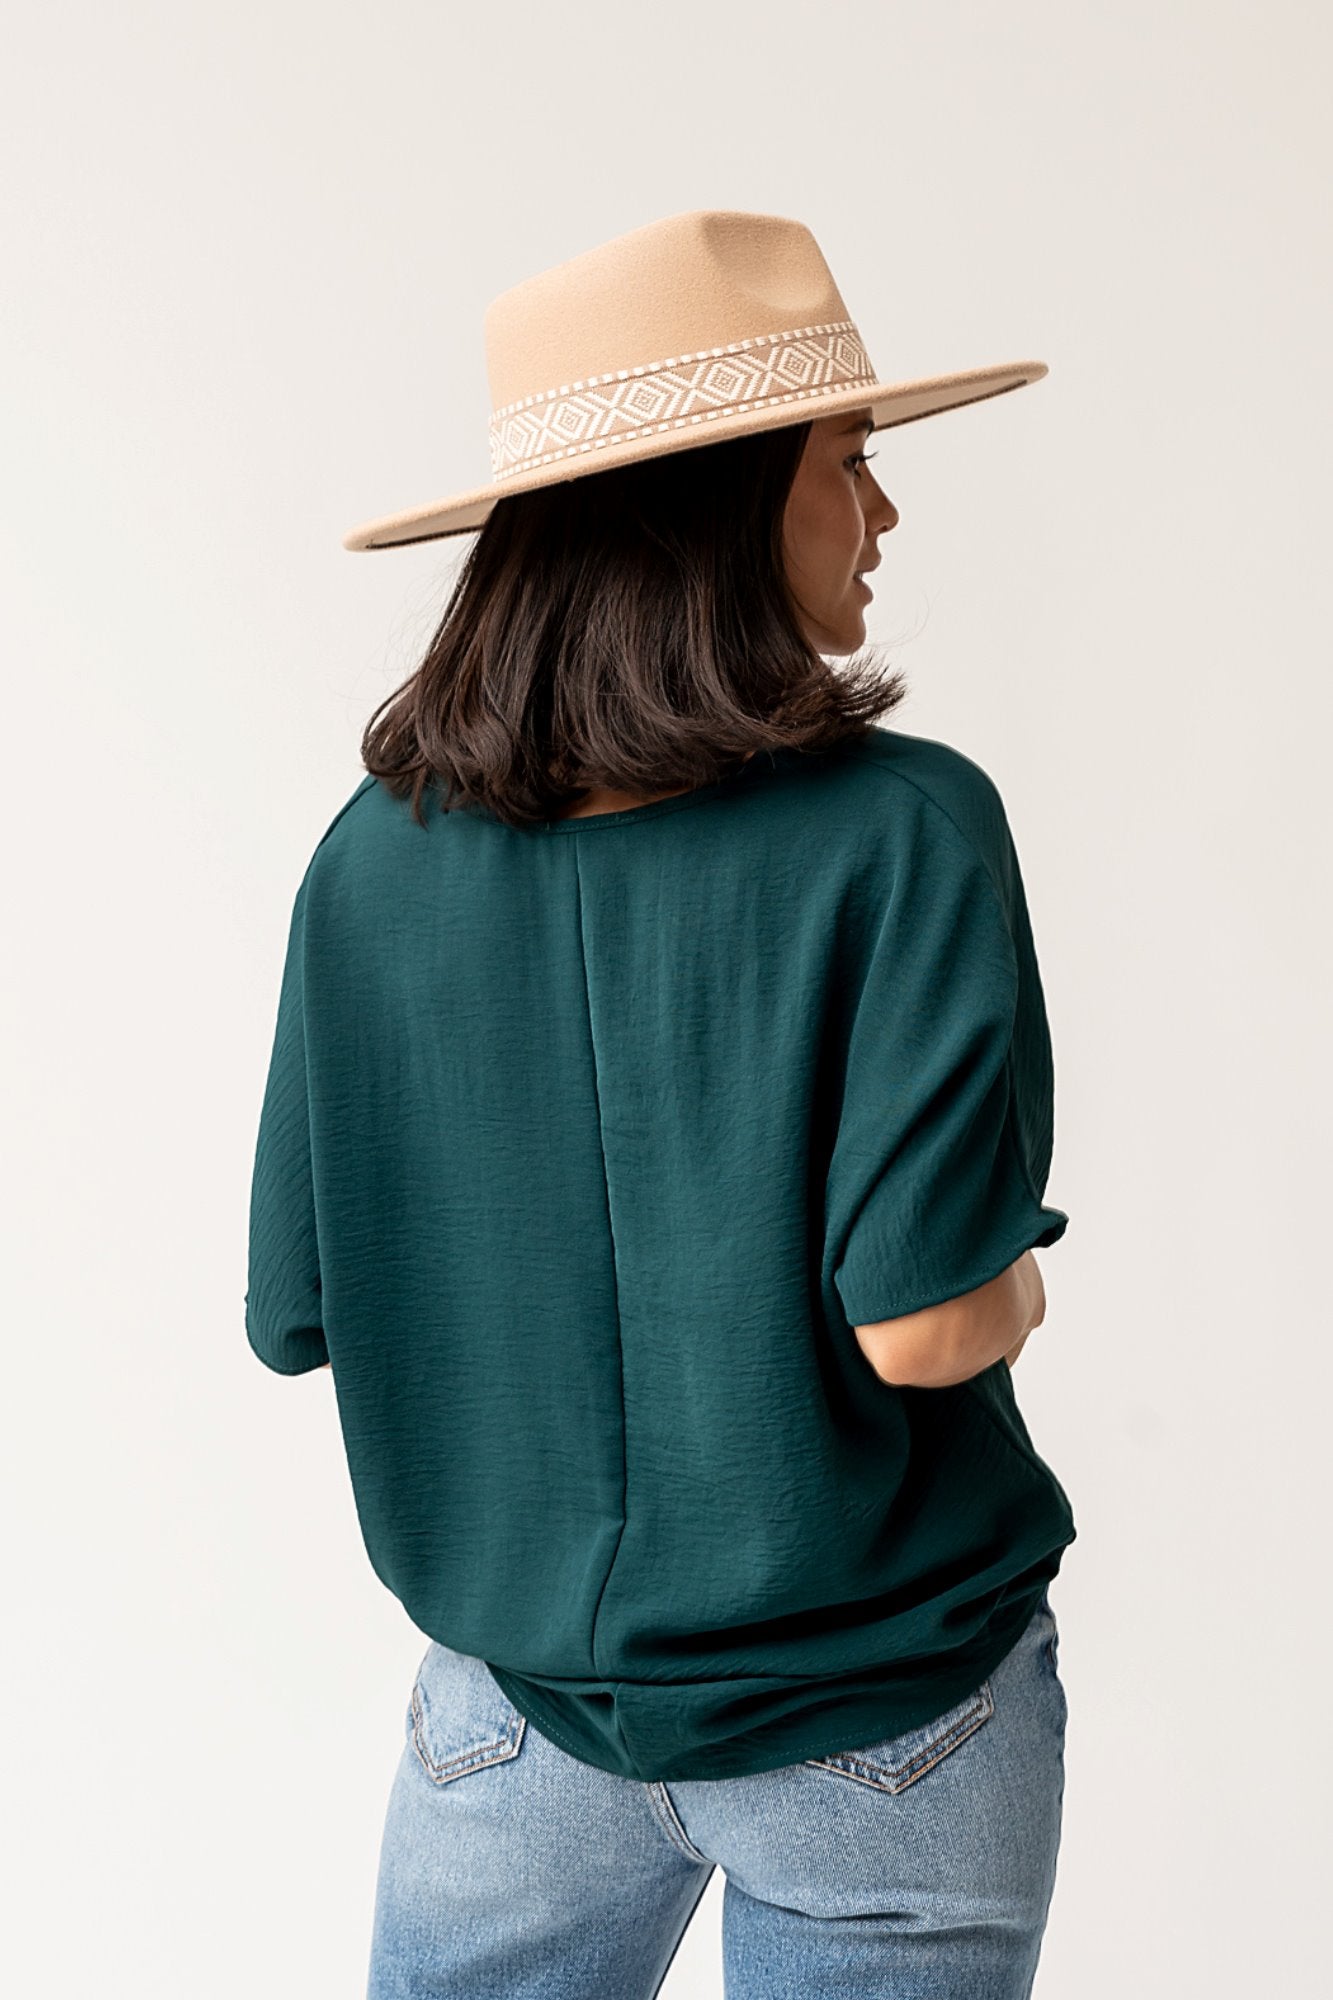 Haven Blouse in Emerald - RESTOCK COMING Clothing Holley Girl 